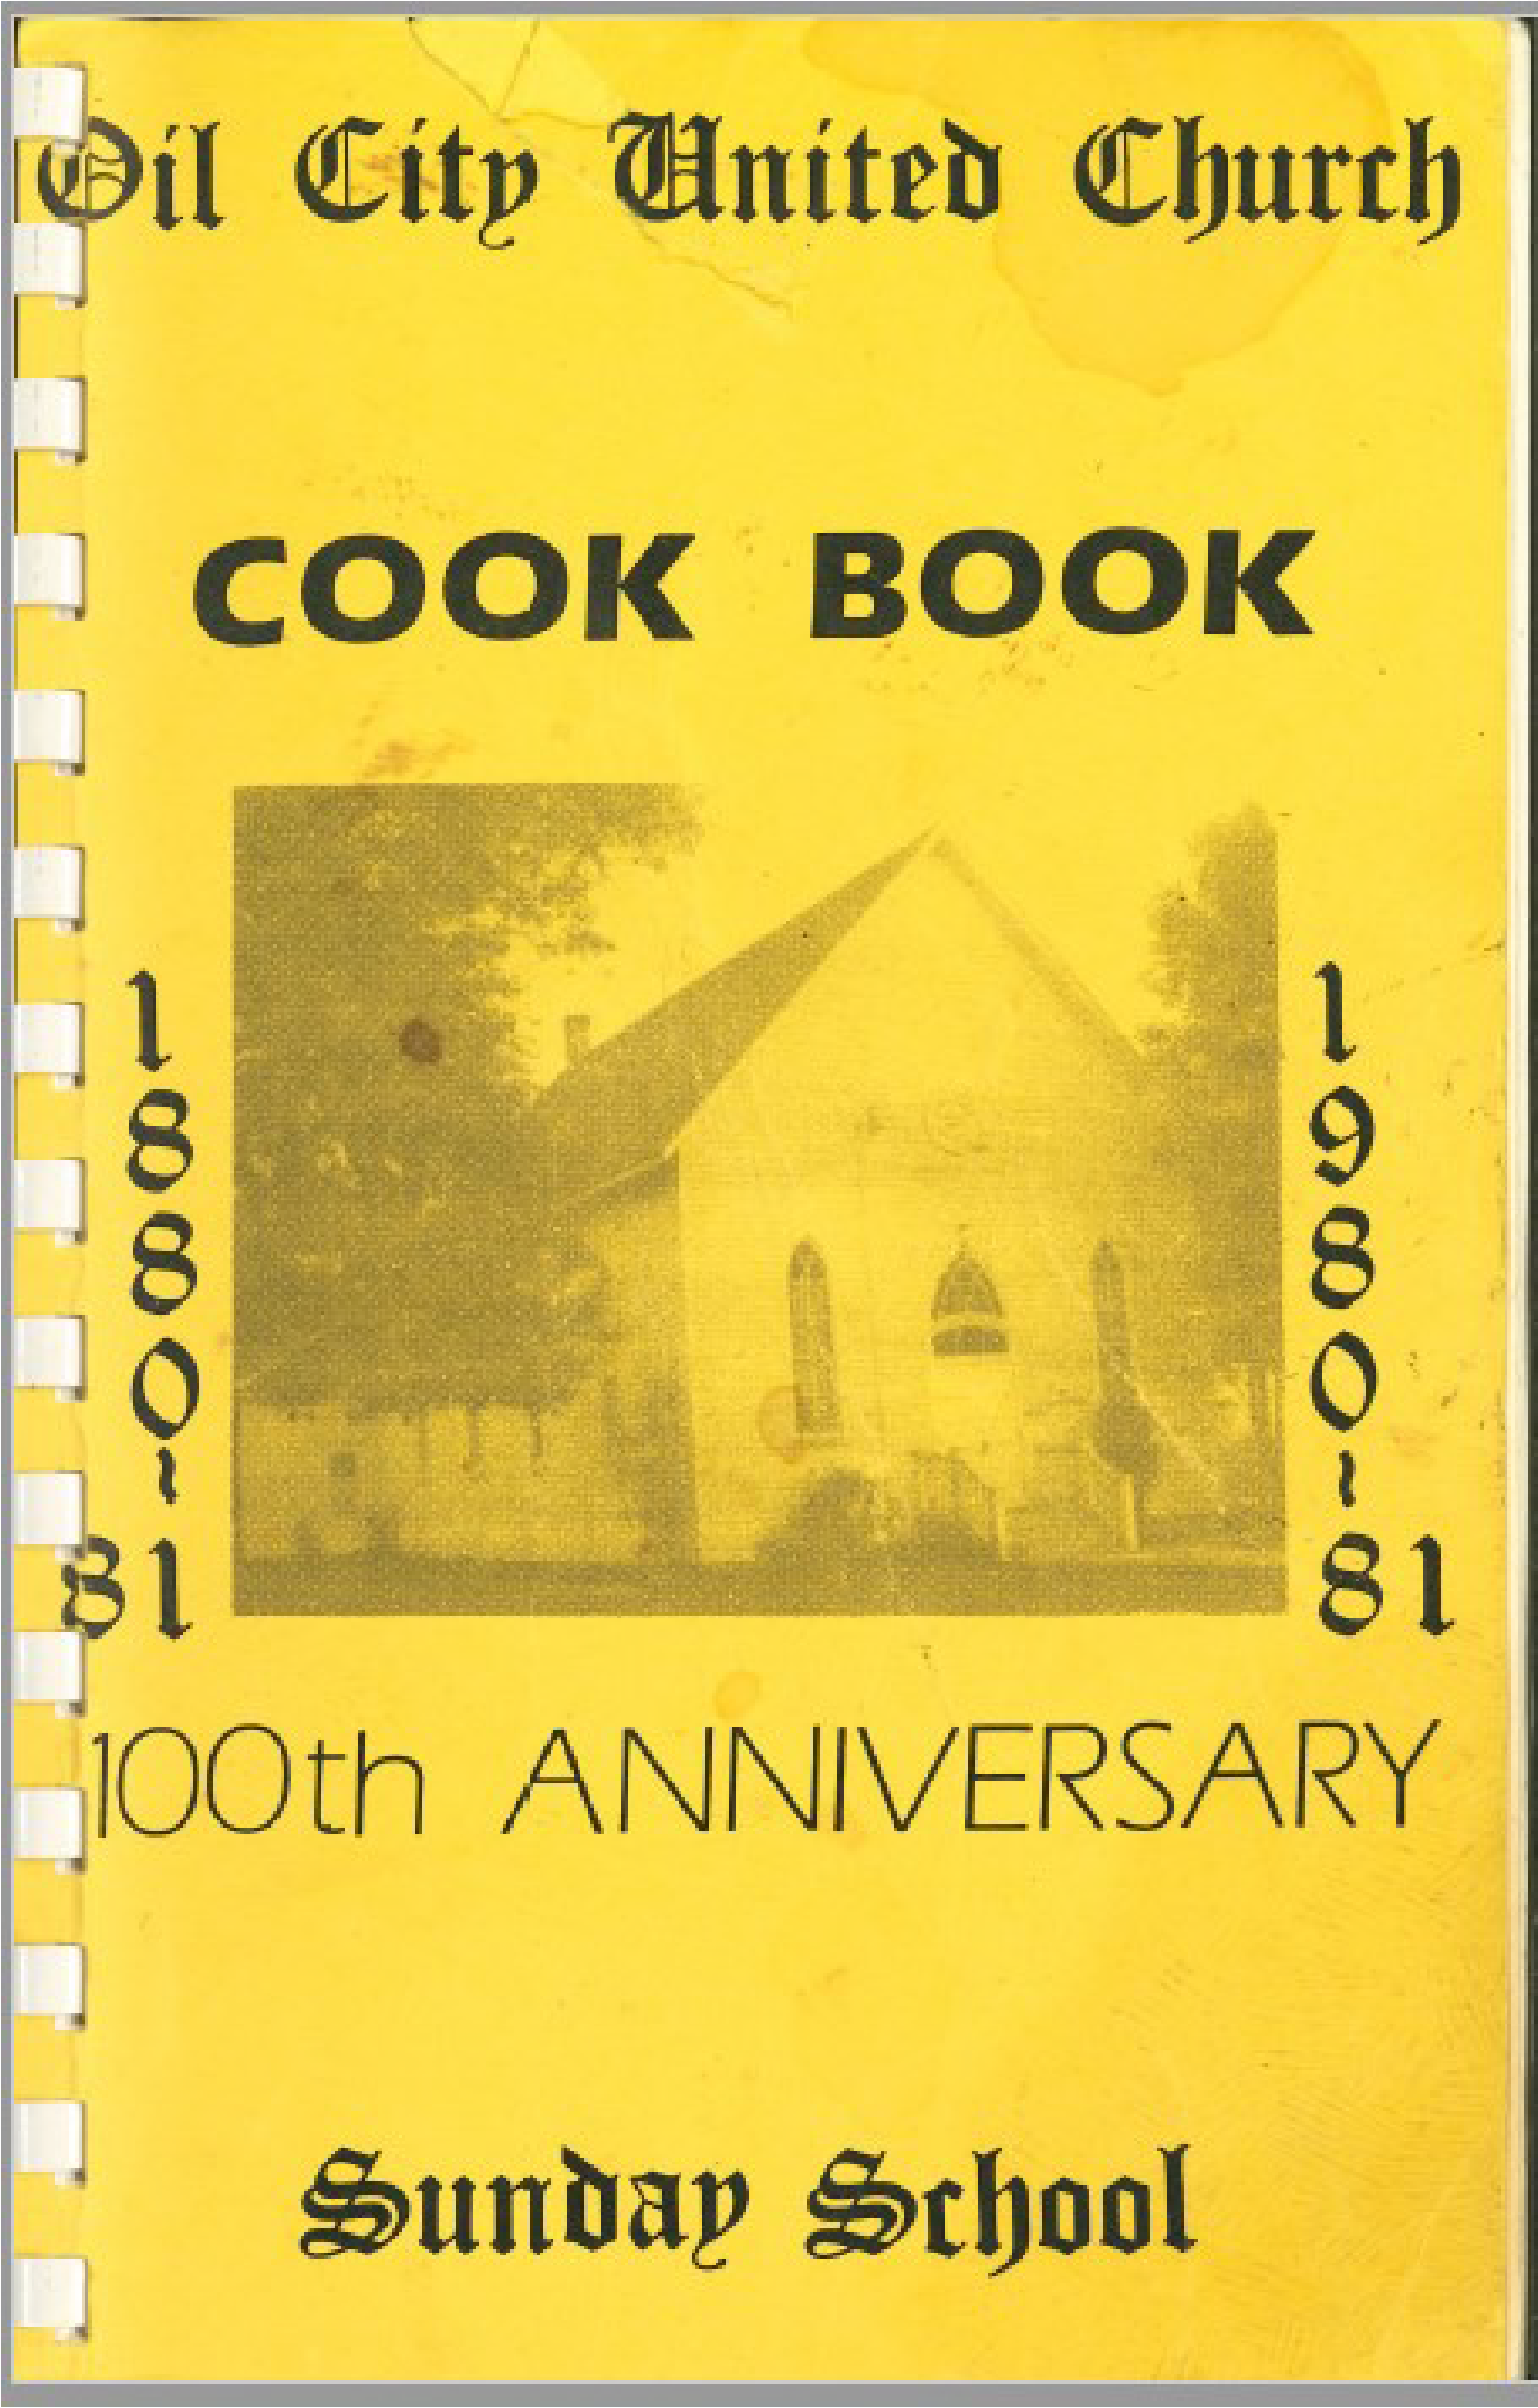 Yellow book cover titled, " Oil City United Church Cook Book".